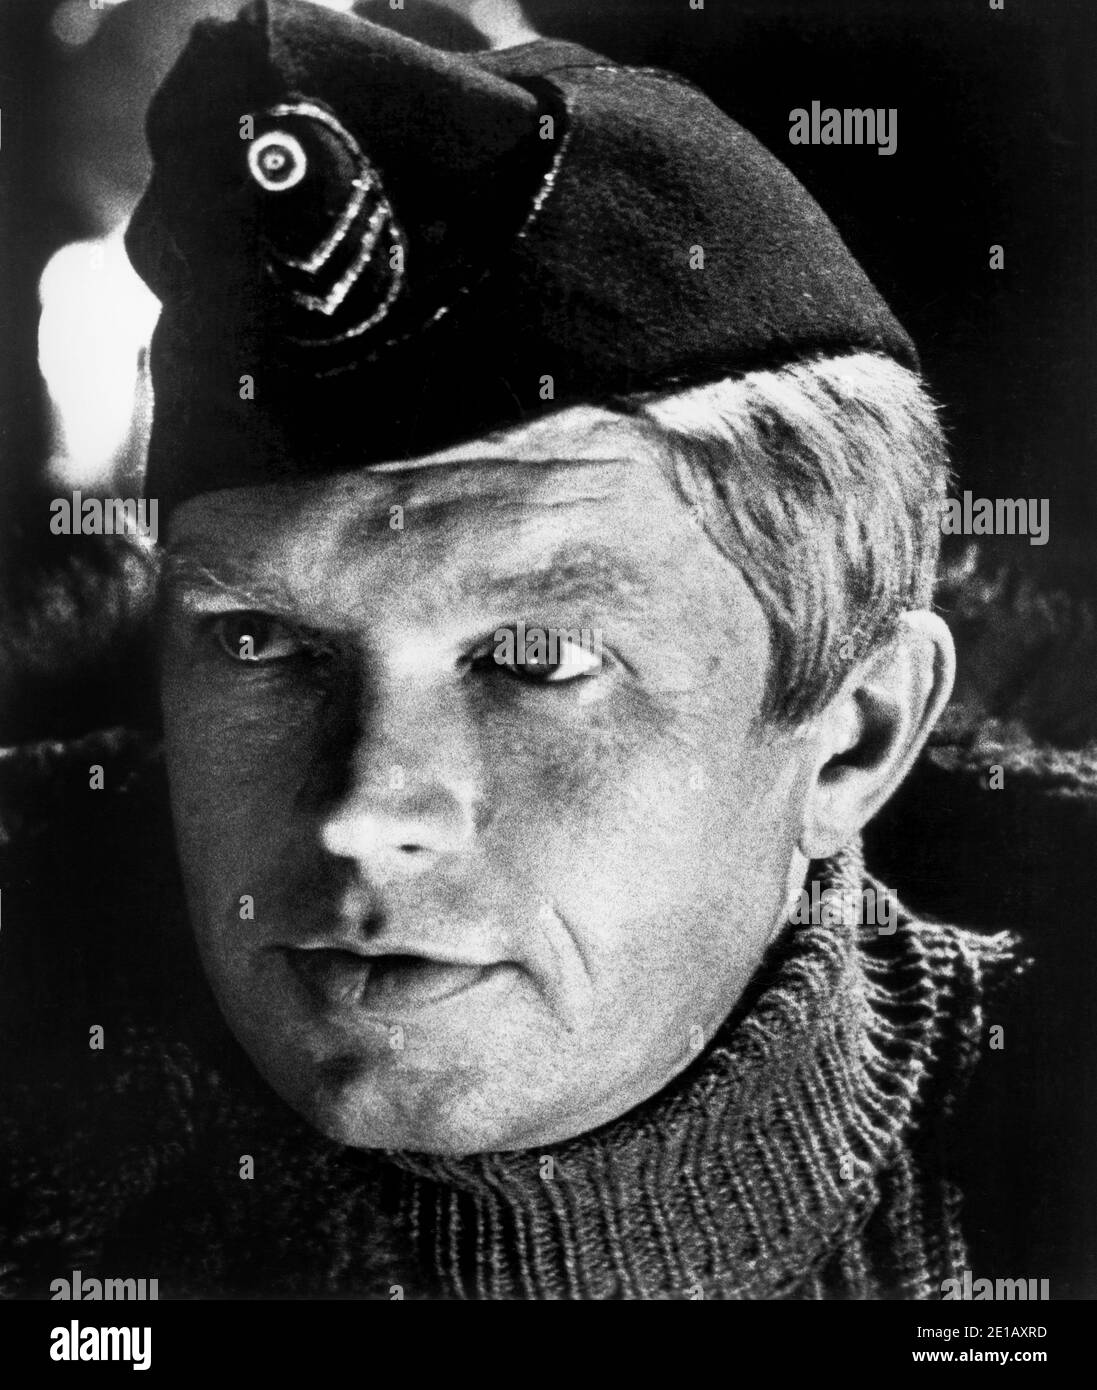 Hardy Kruger, Head and Shoulders Publicity Portrait for the Soviet/Italian Film, 'The Red Tent', Russian: Krasnaya palatka, Italian: La tenda rossa, Vides Cinematografica, 1969 USA Release via Paramount Pictures, 1971 Stock Photo